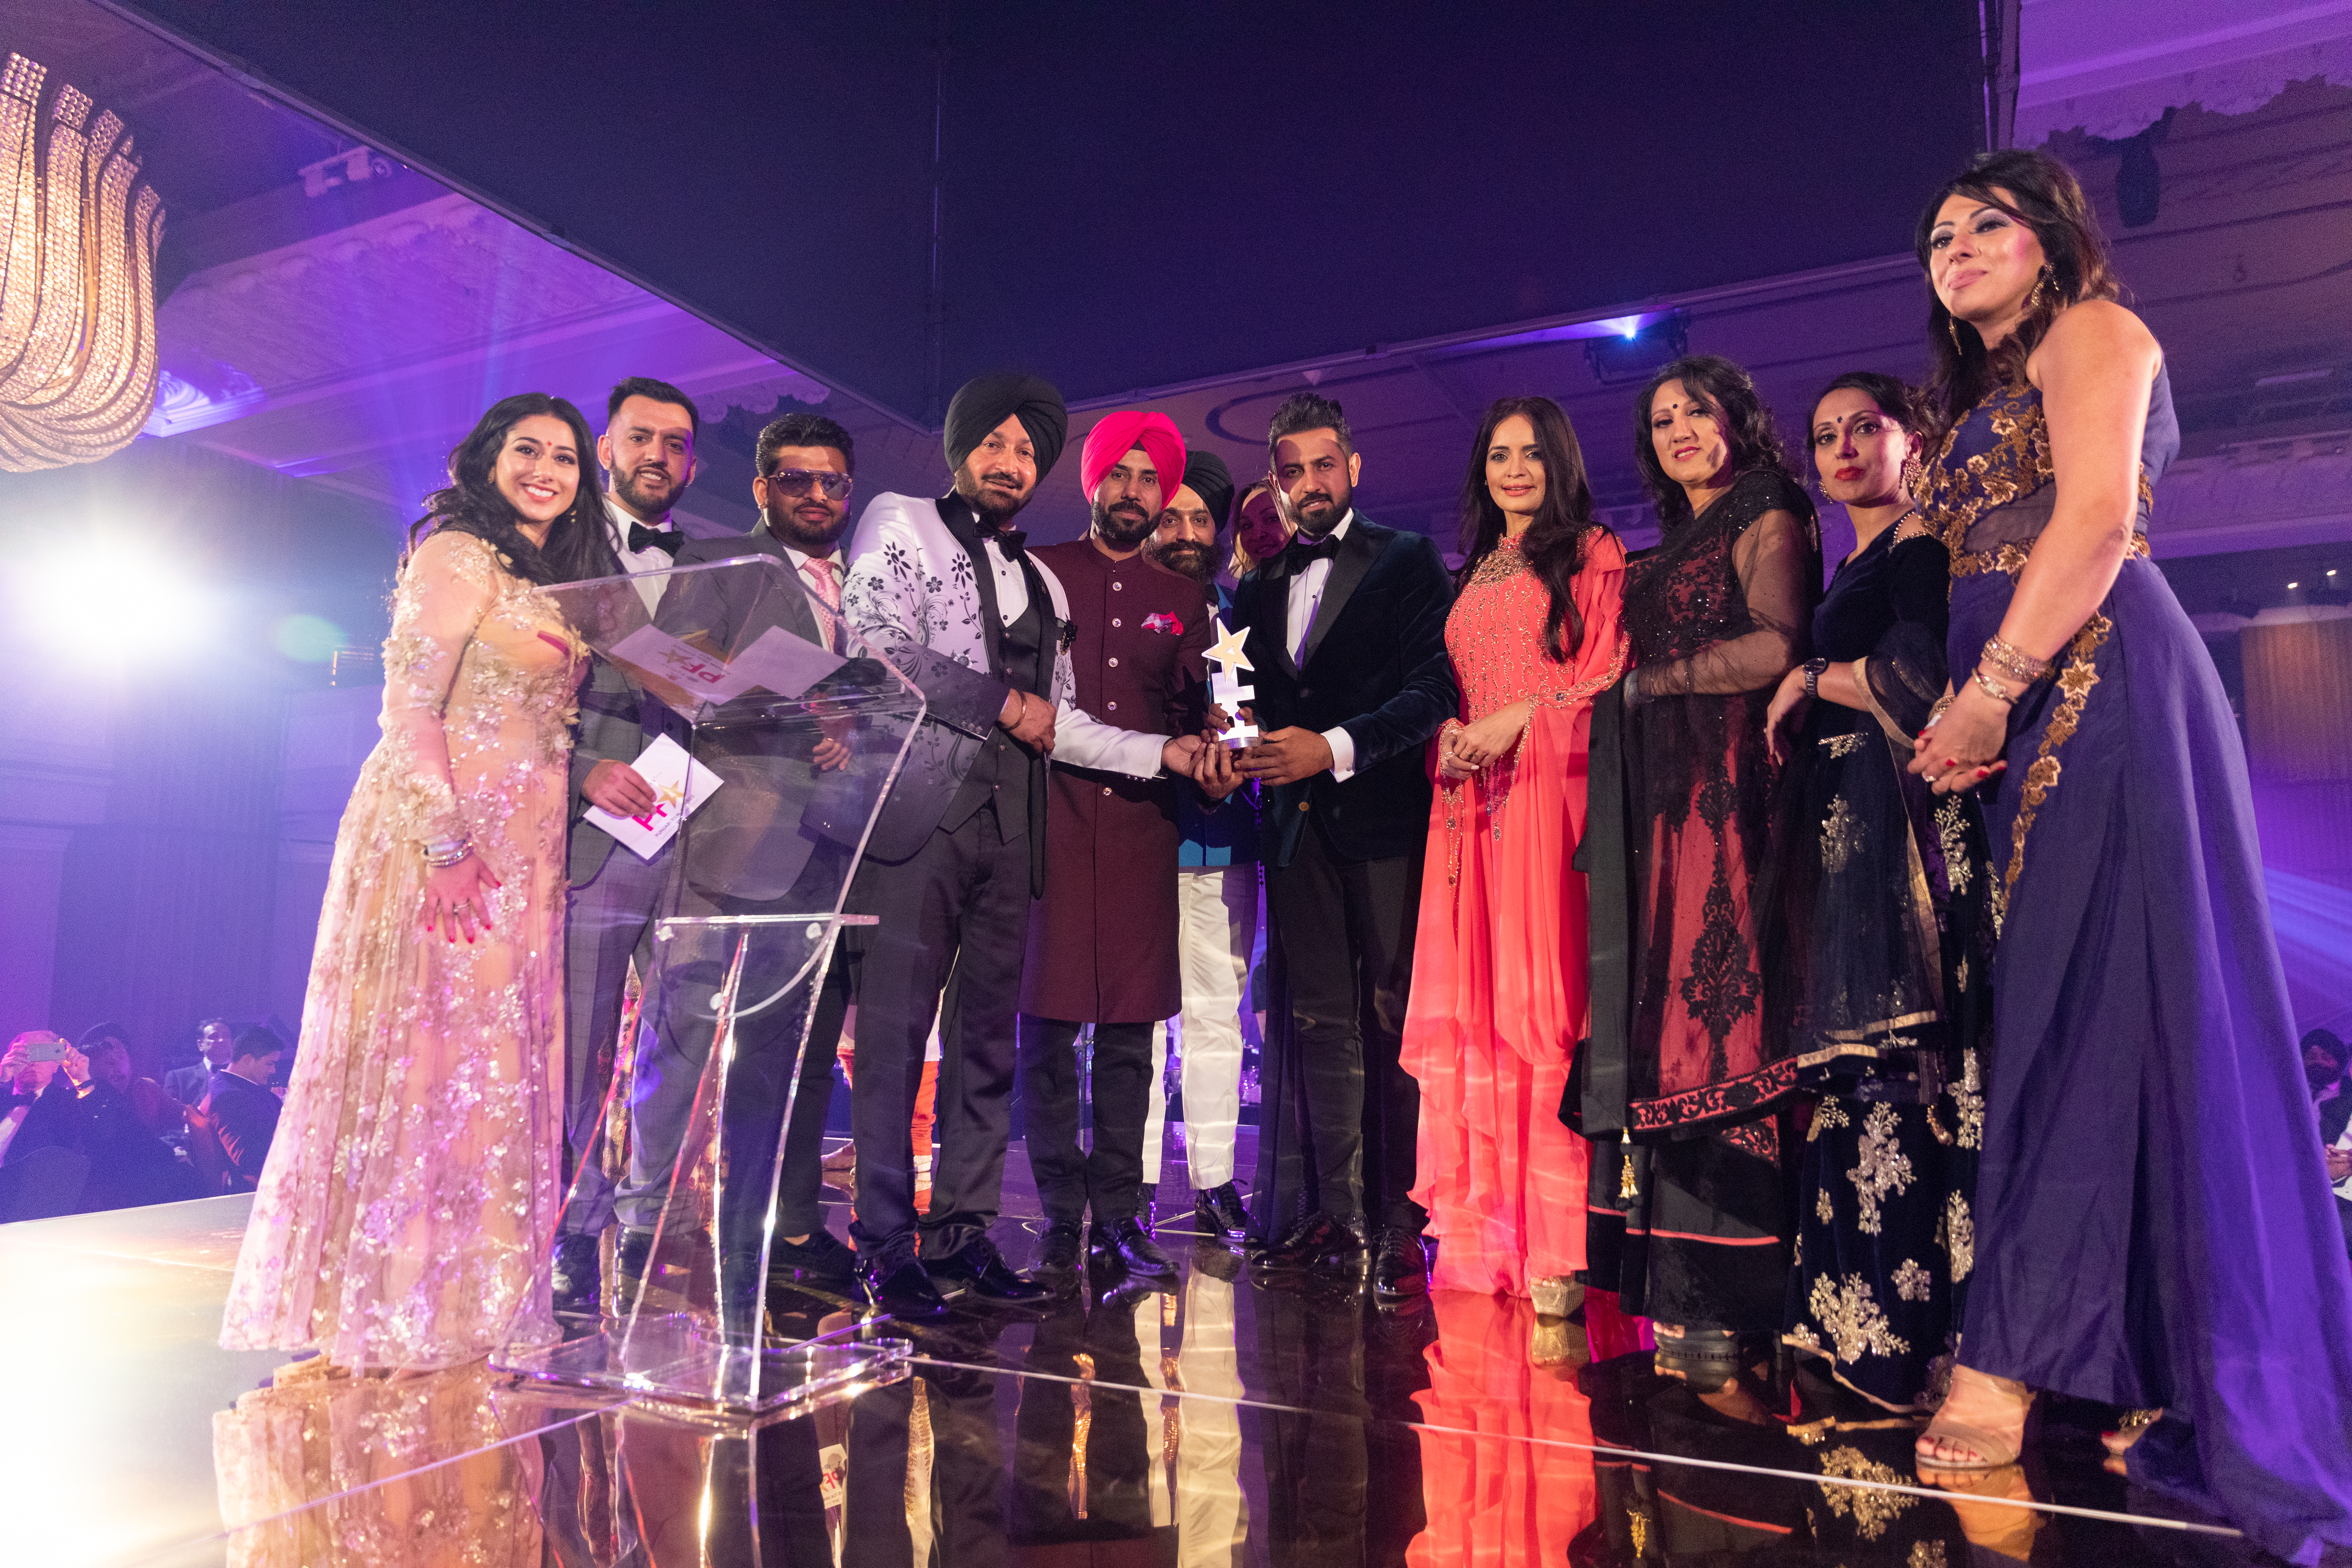 'Carry on Jatta 2' cast Gippy Grewal and Binnu Dhillon pick up the award for Best Film